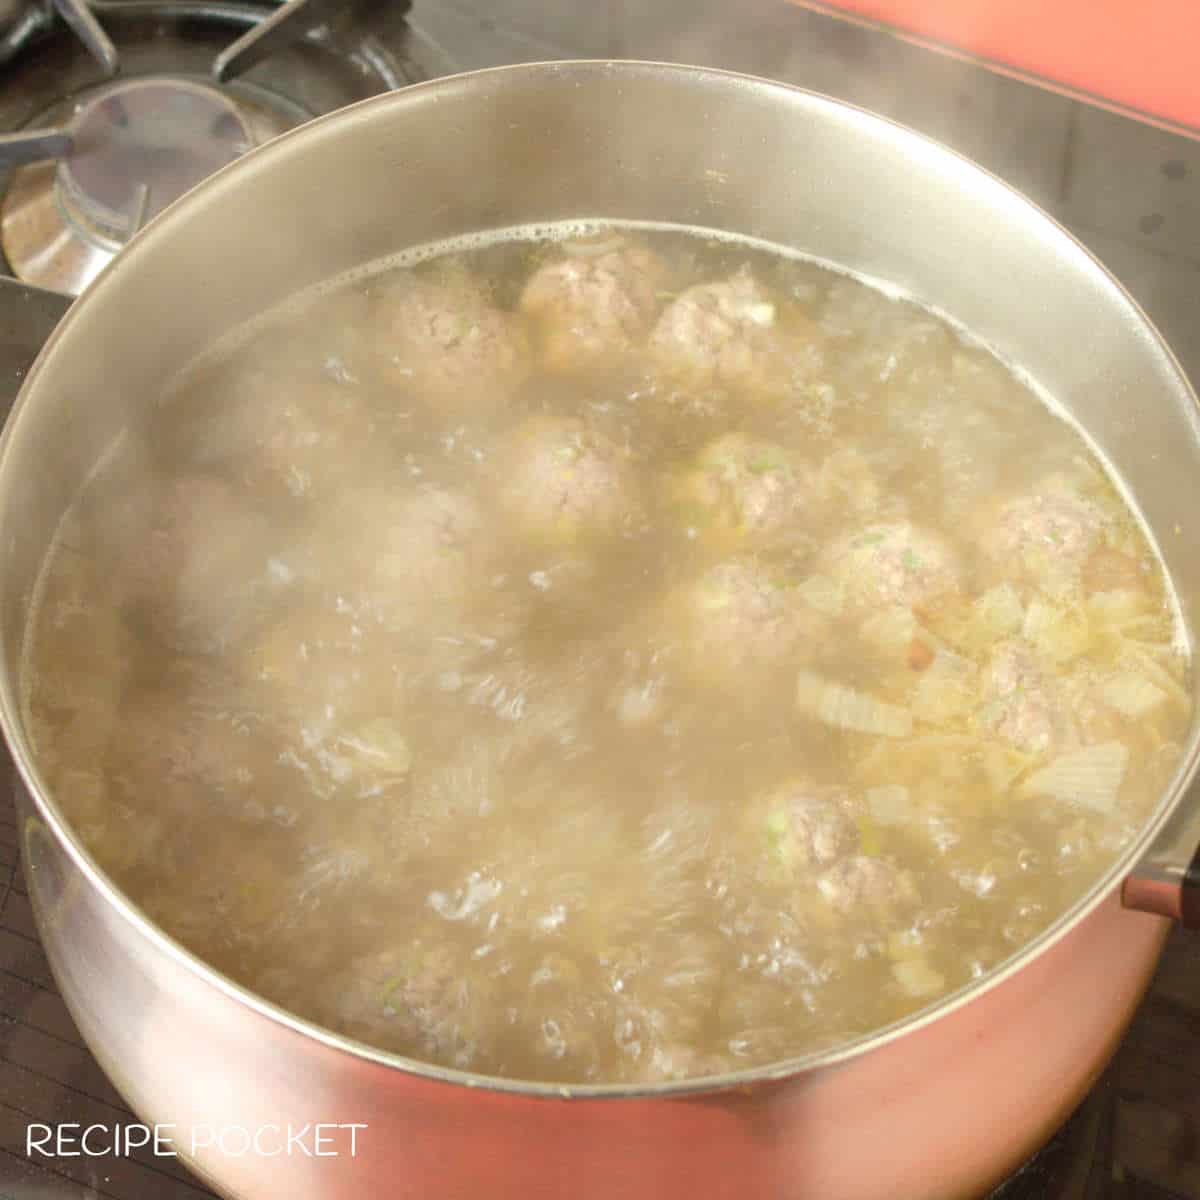 Meat balls simmering in soup.